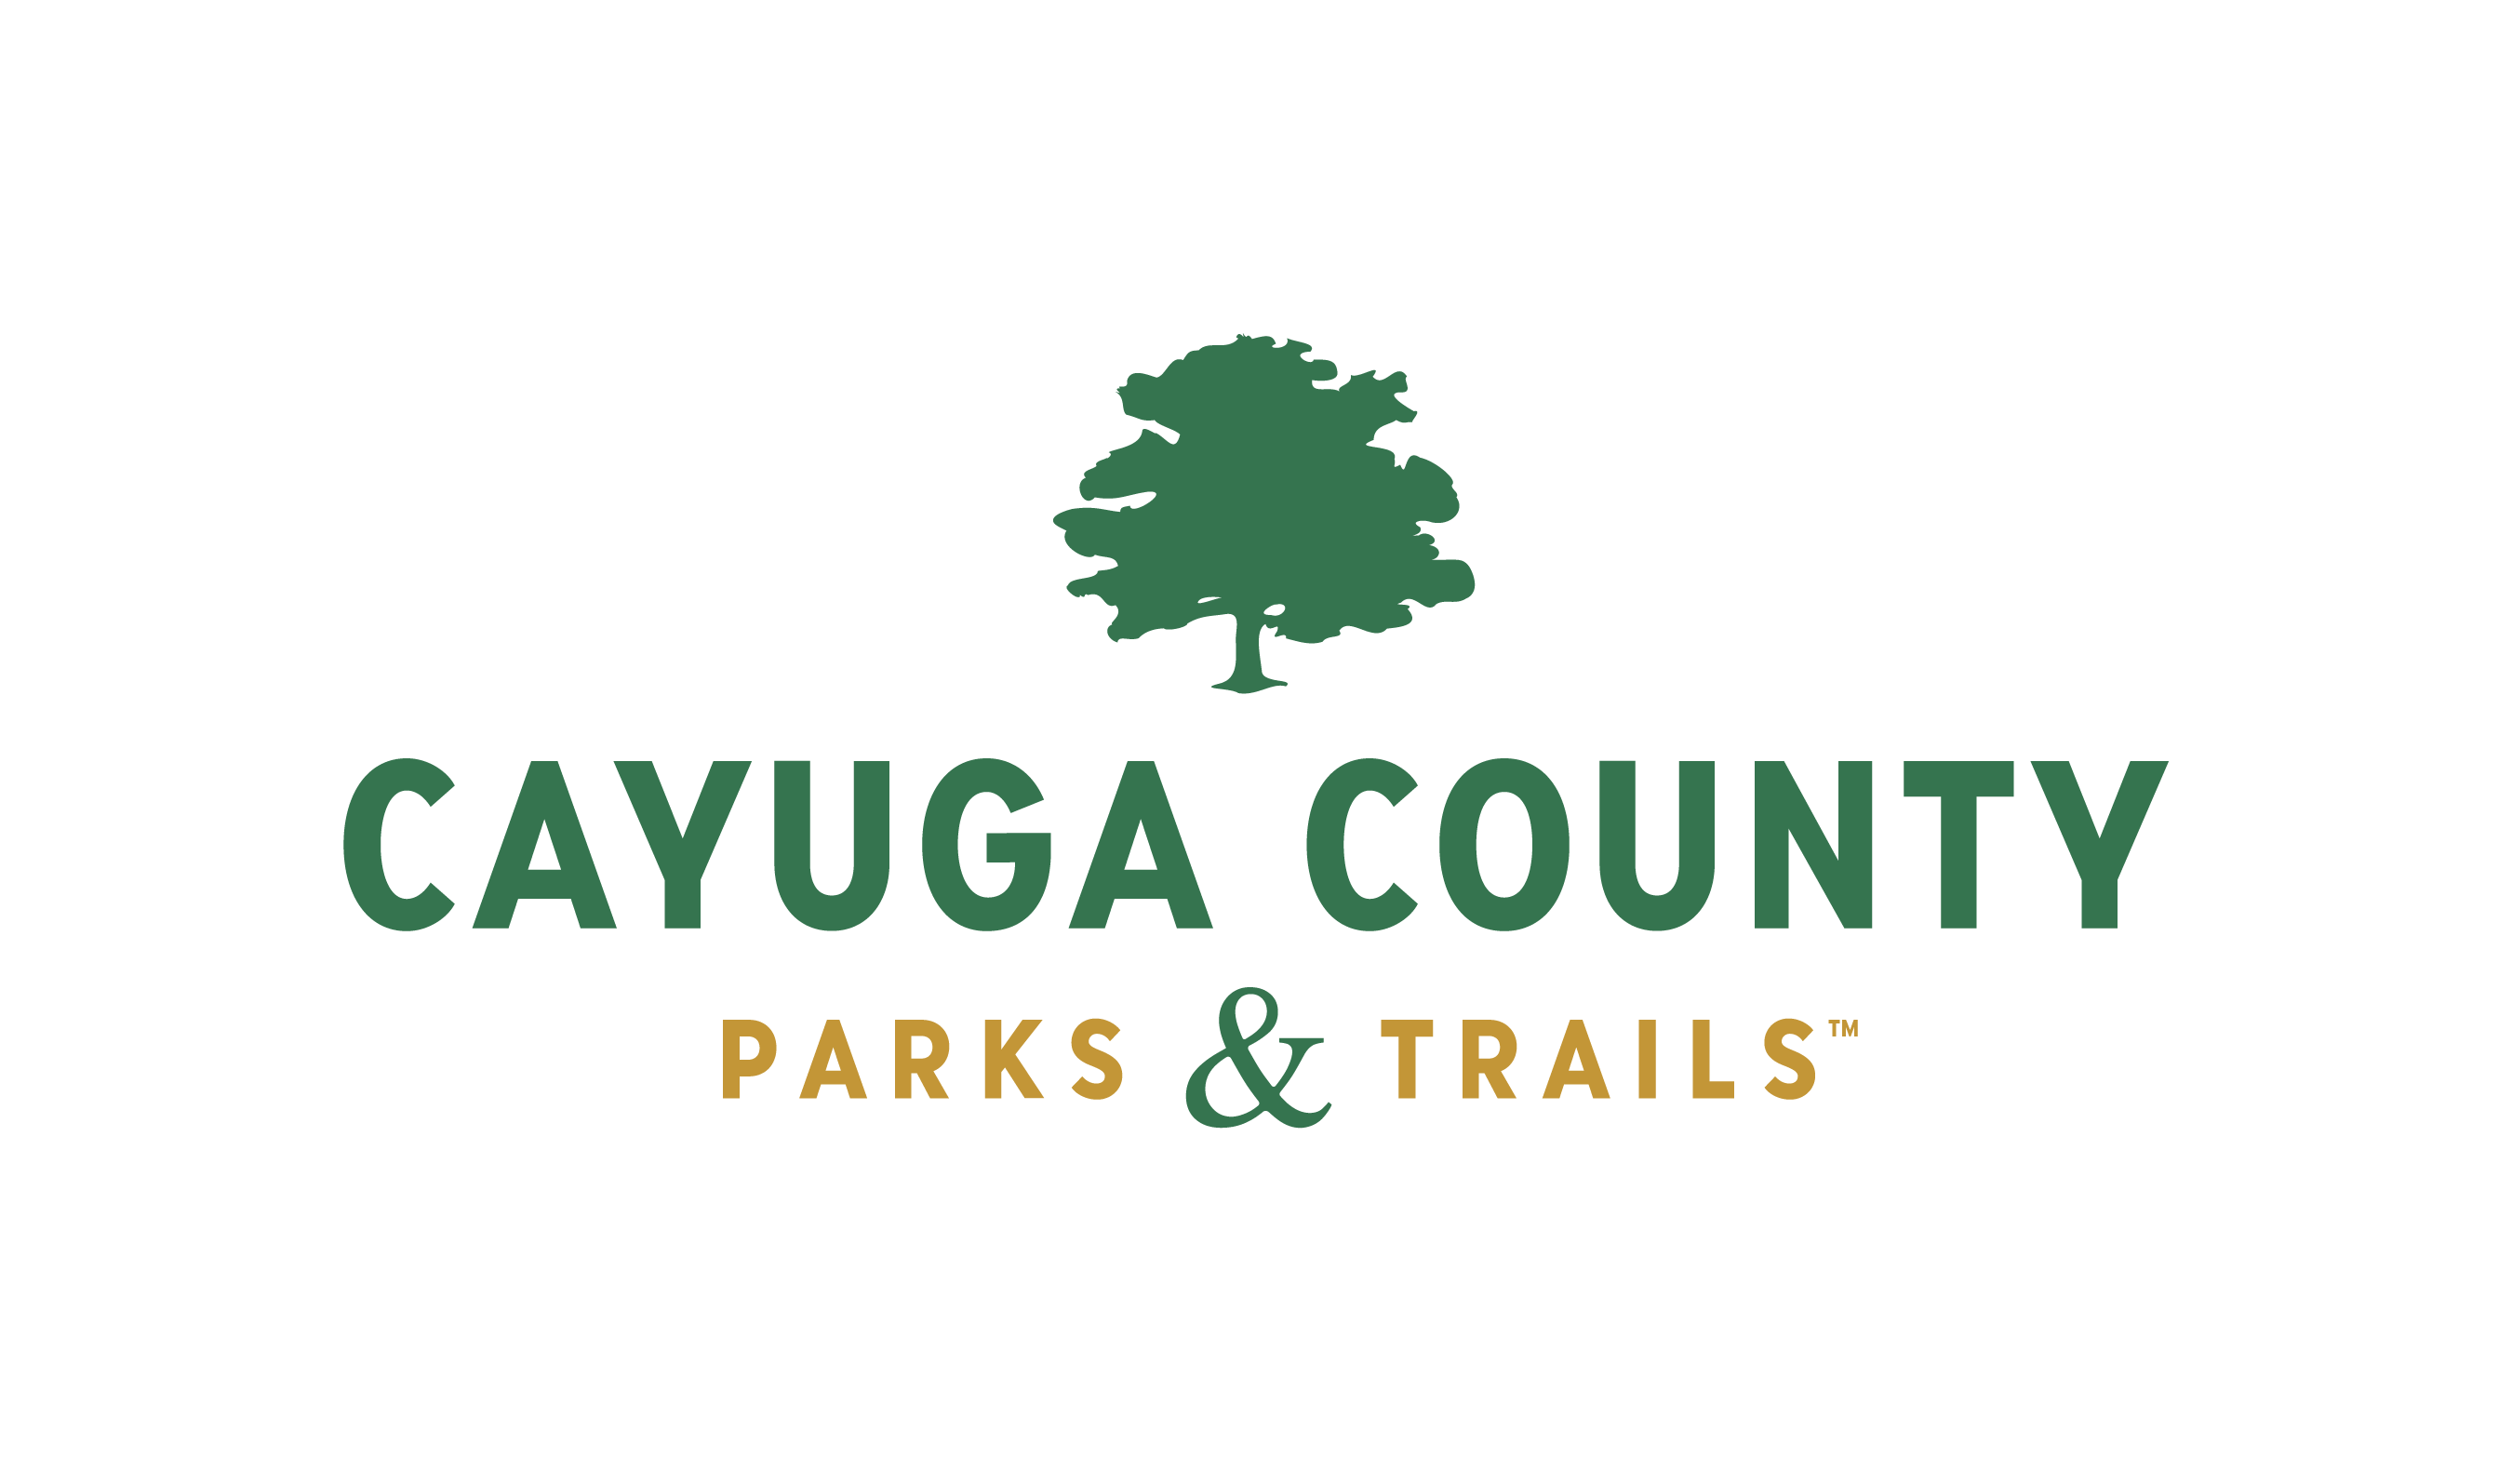 Cayuga County Parks & Trails Department badge logo in green, white and gold